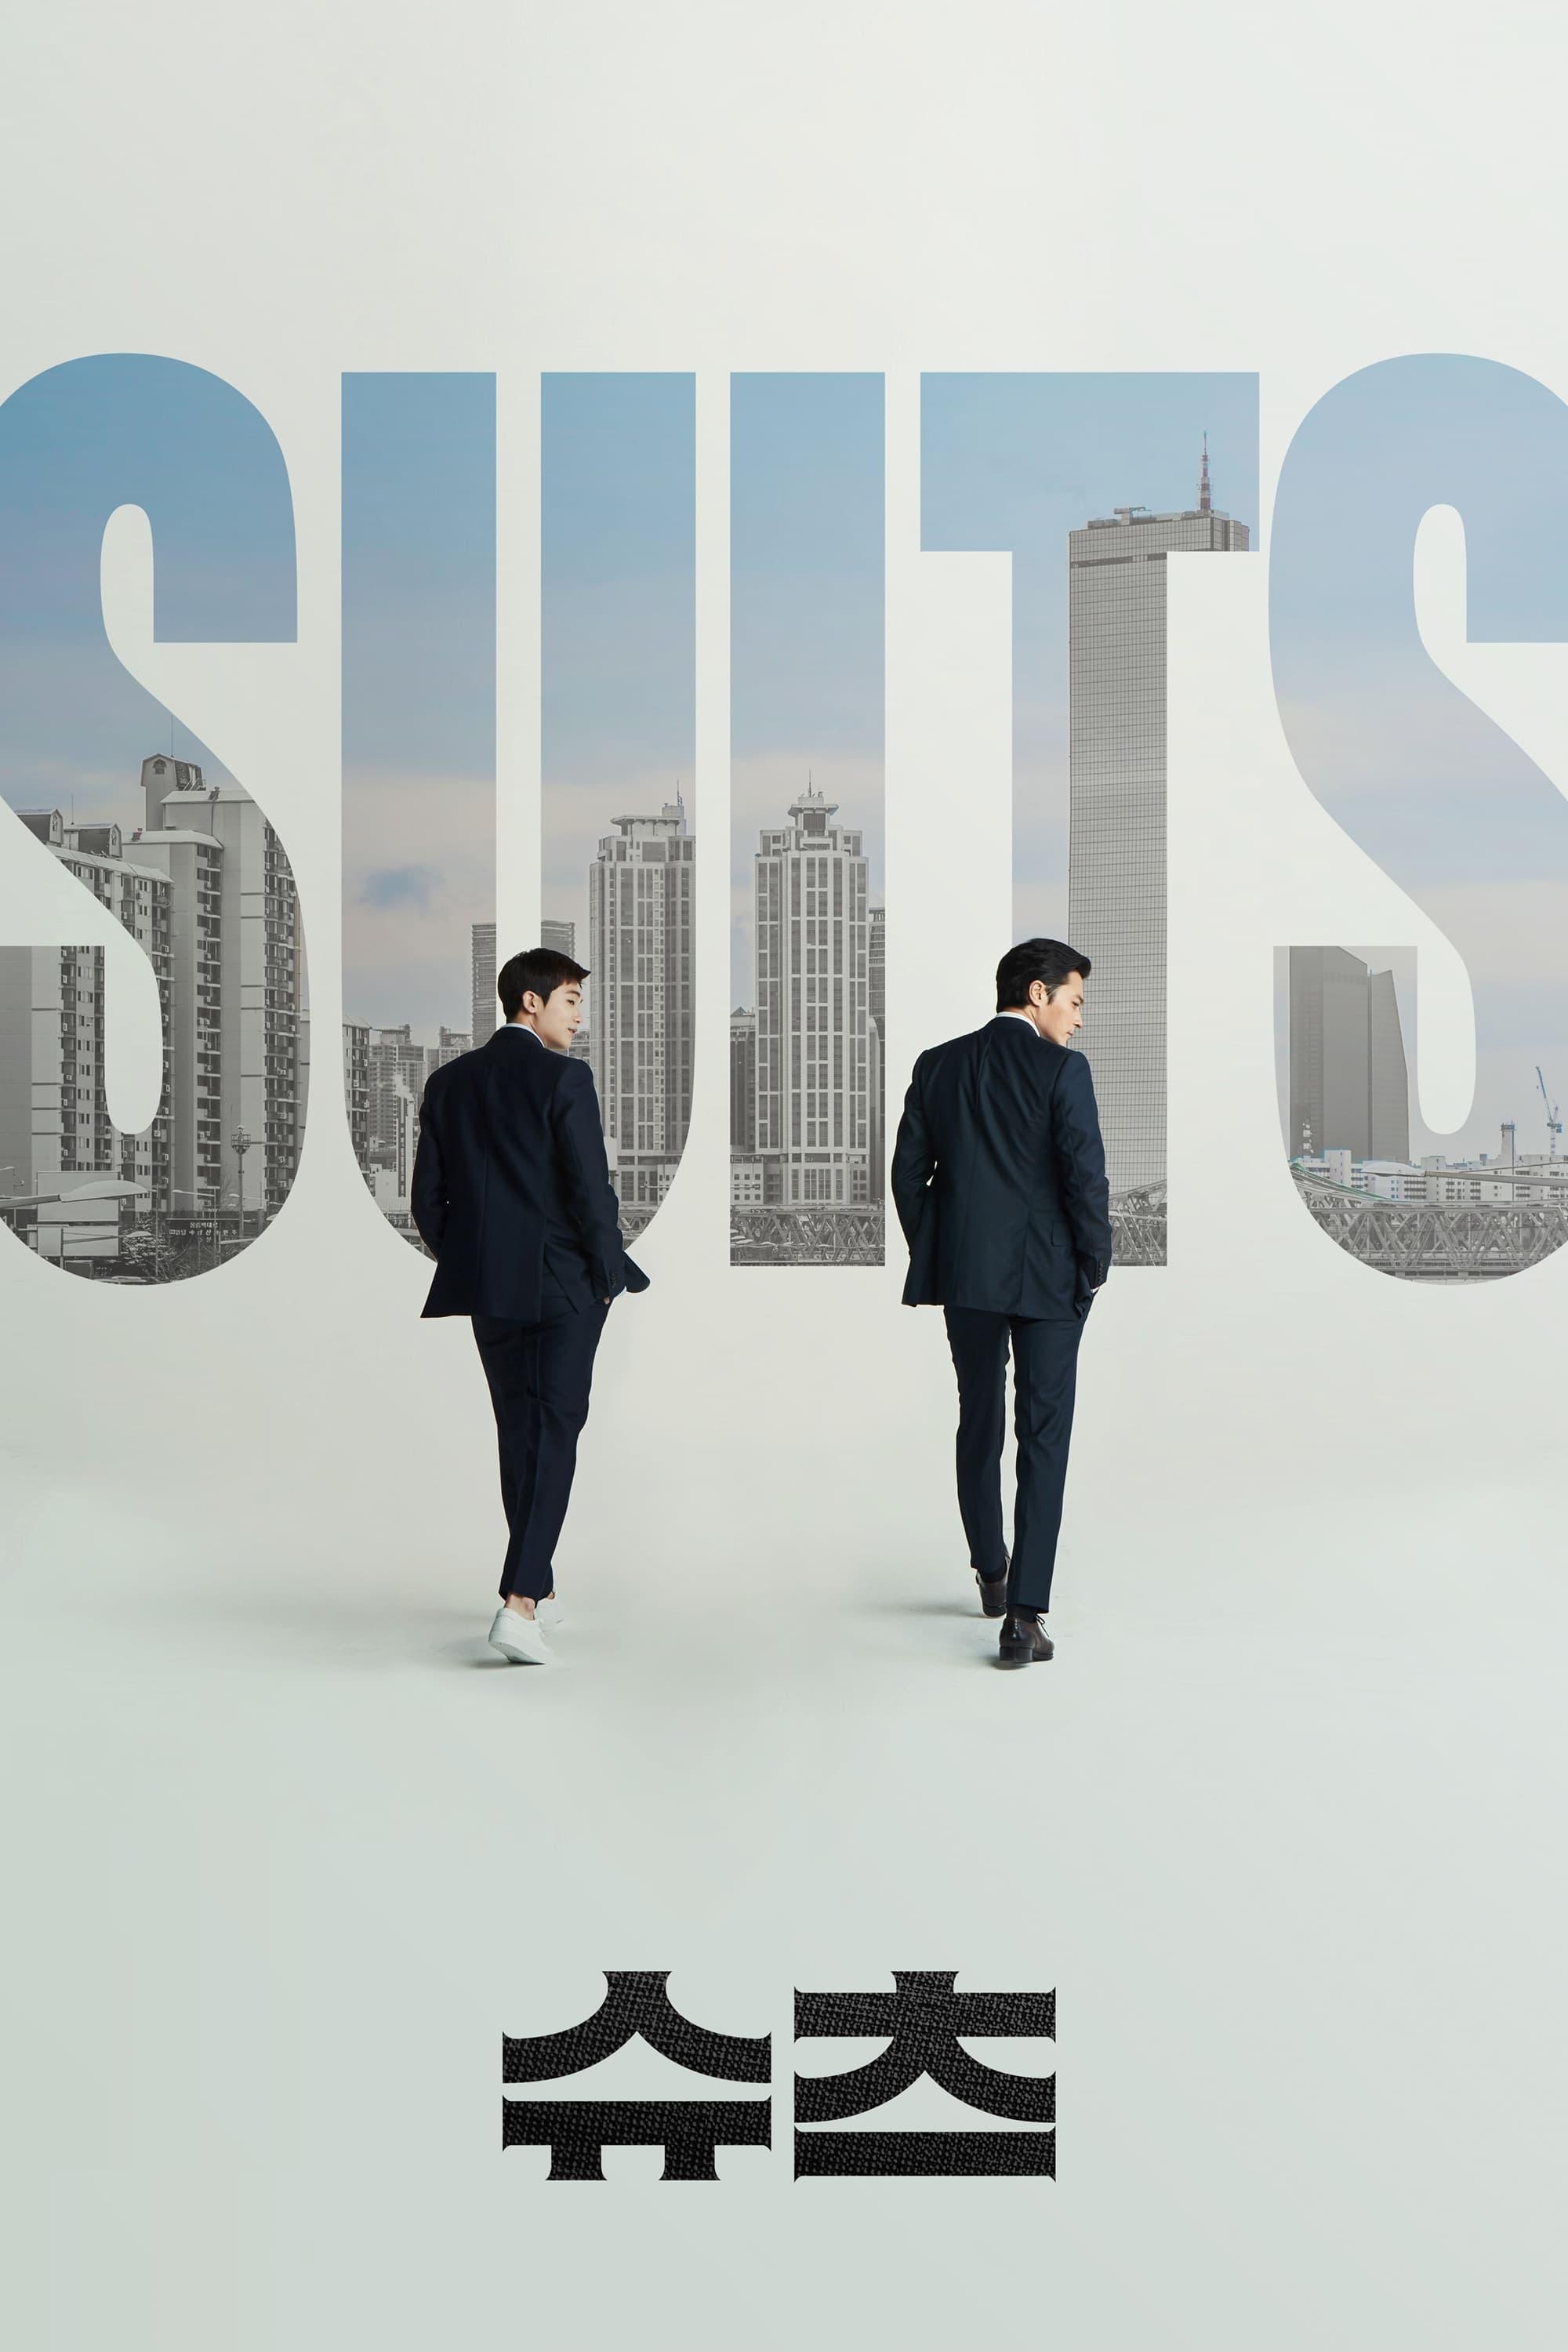 Suits poster